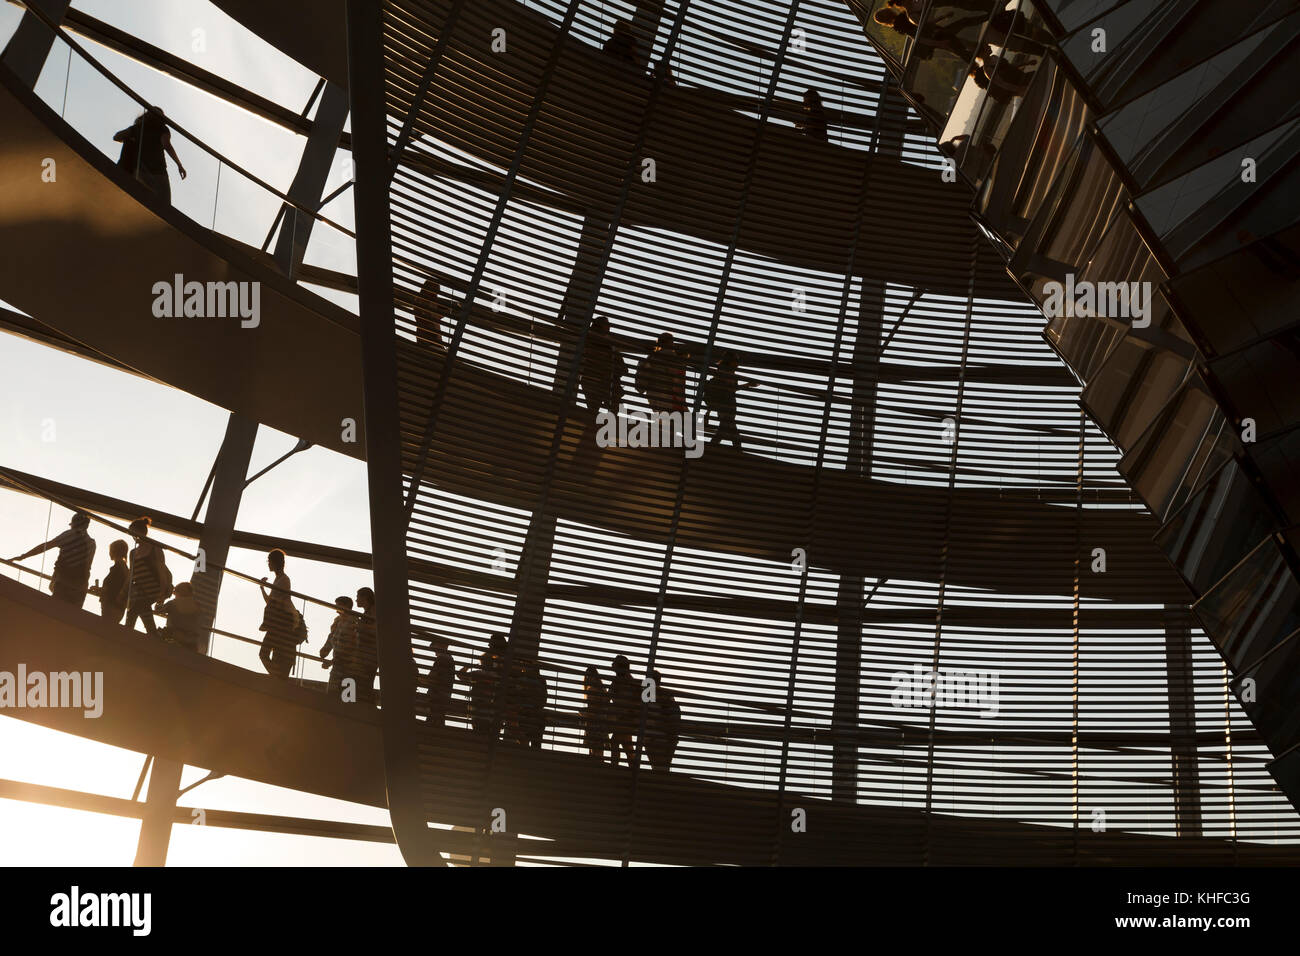 The Reichstag dome in Berlin opened to visitors. The Reichstag dome is a glass dome from architect Norman Foster, on t Stock Photo